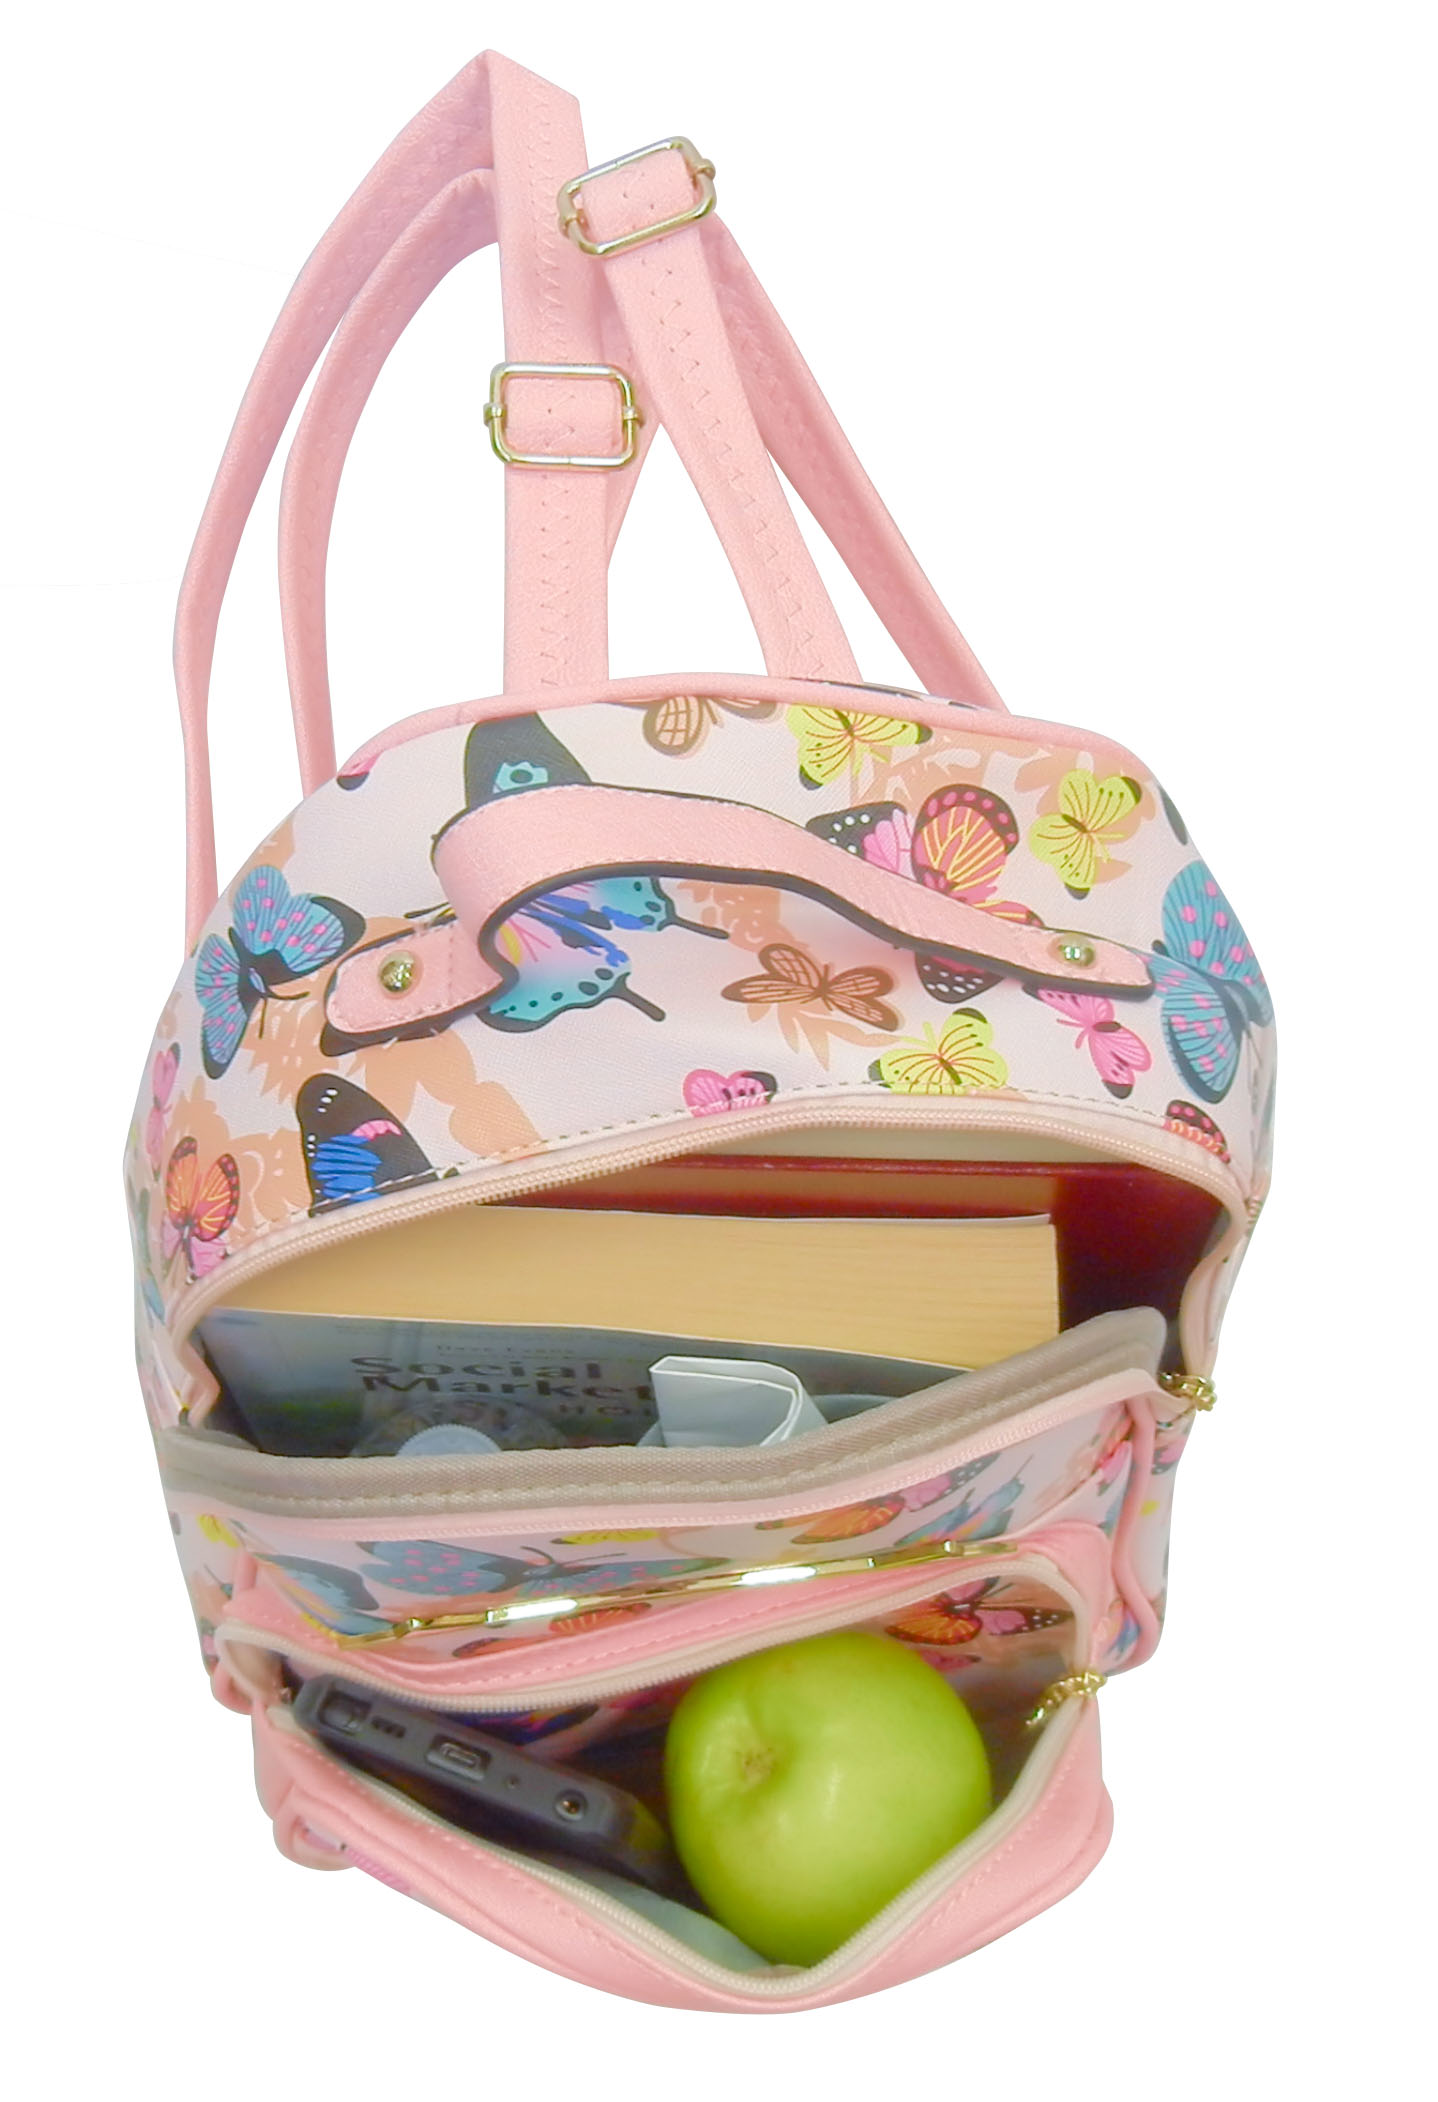 backpack for young girls, pink, butterflies, bright, colorful, 